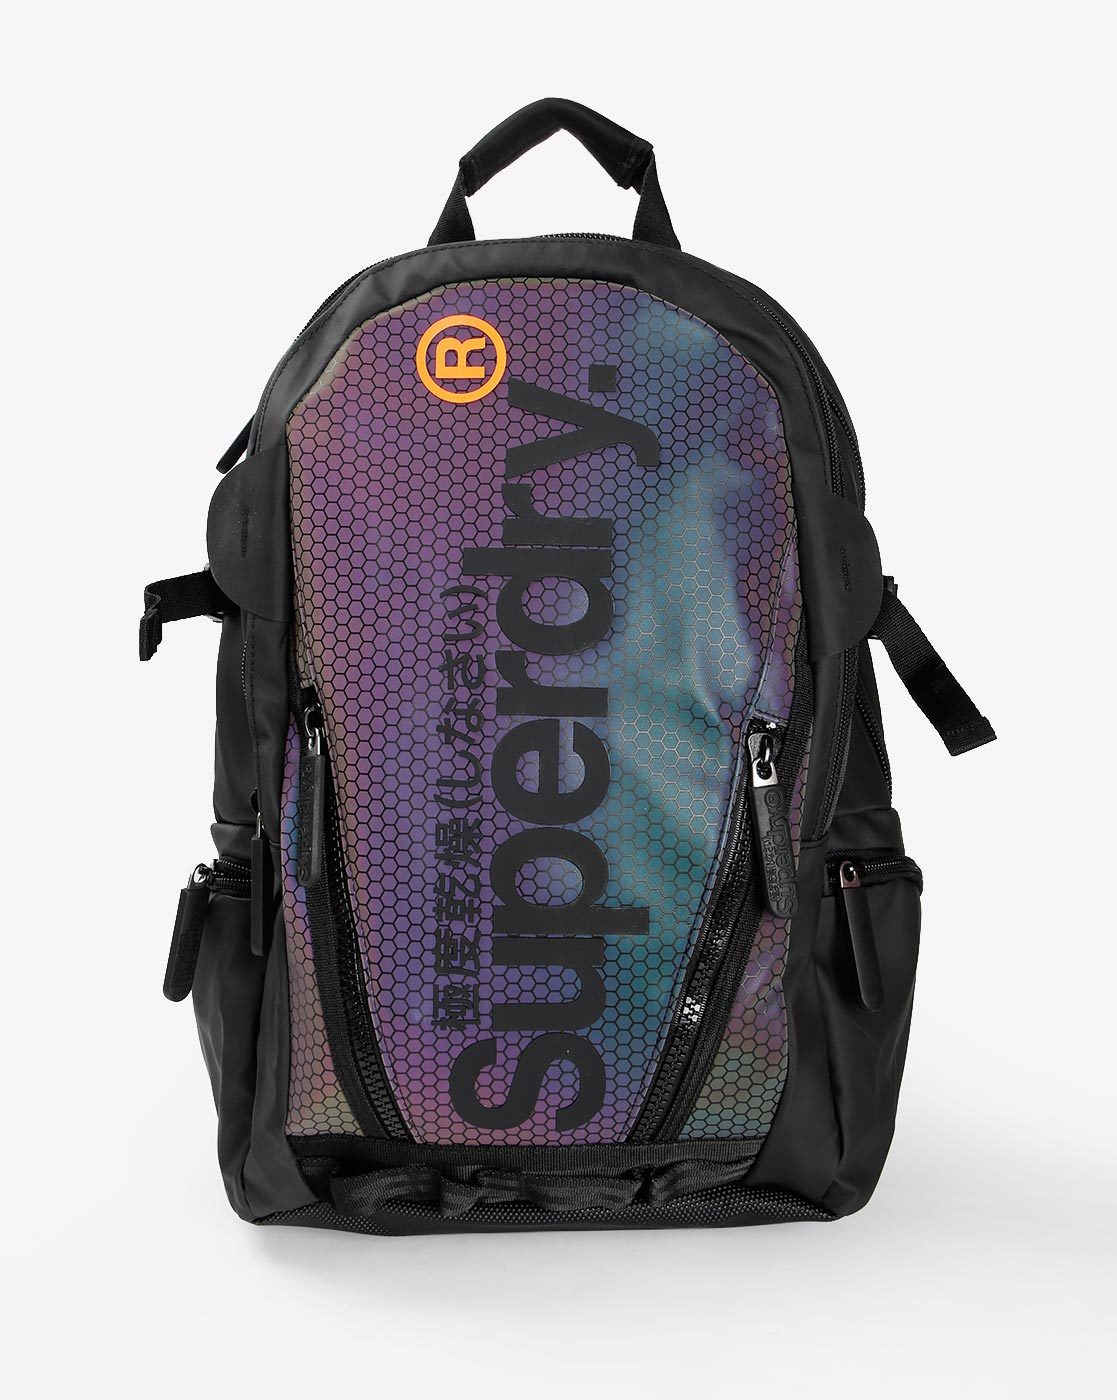 Amazon.com: Superdry Backpack